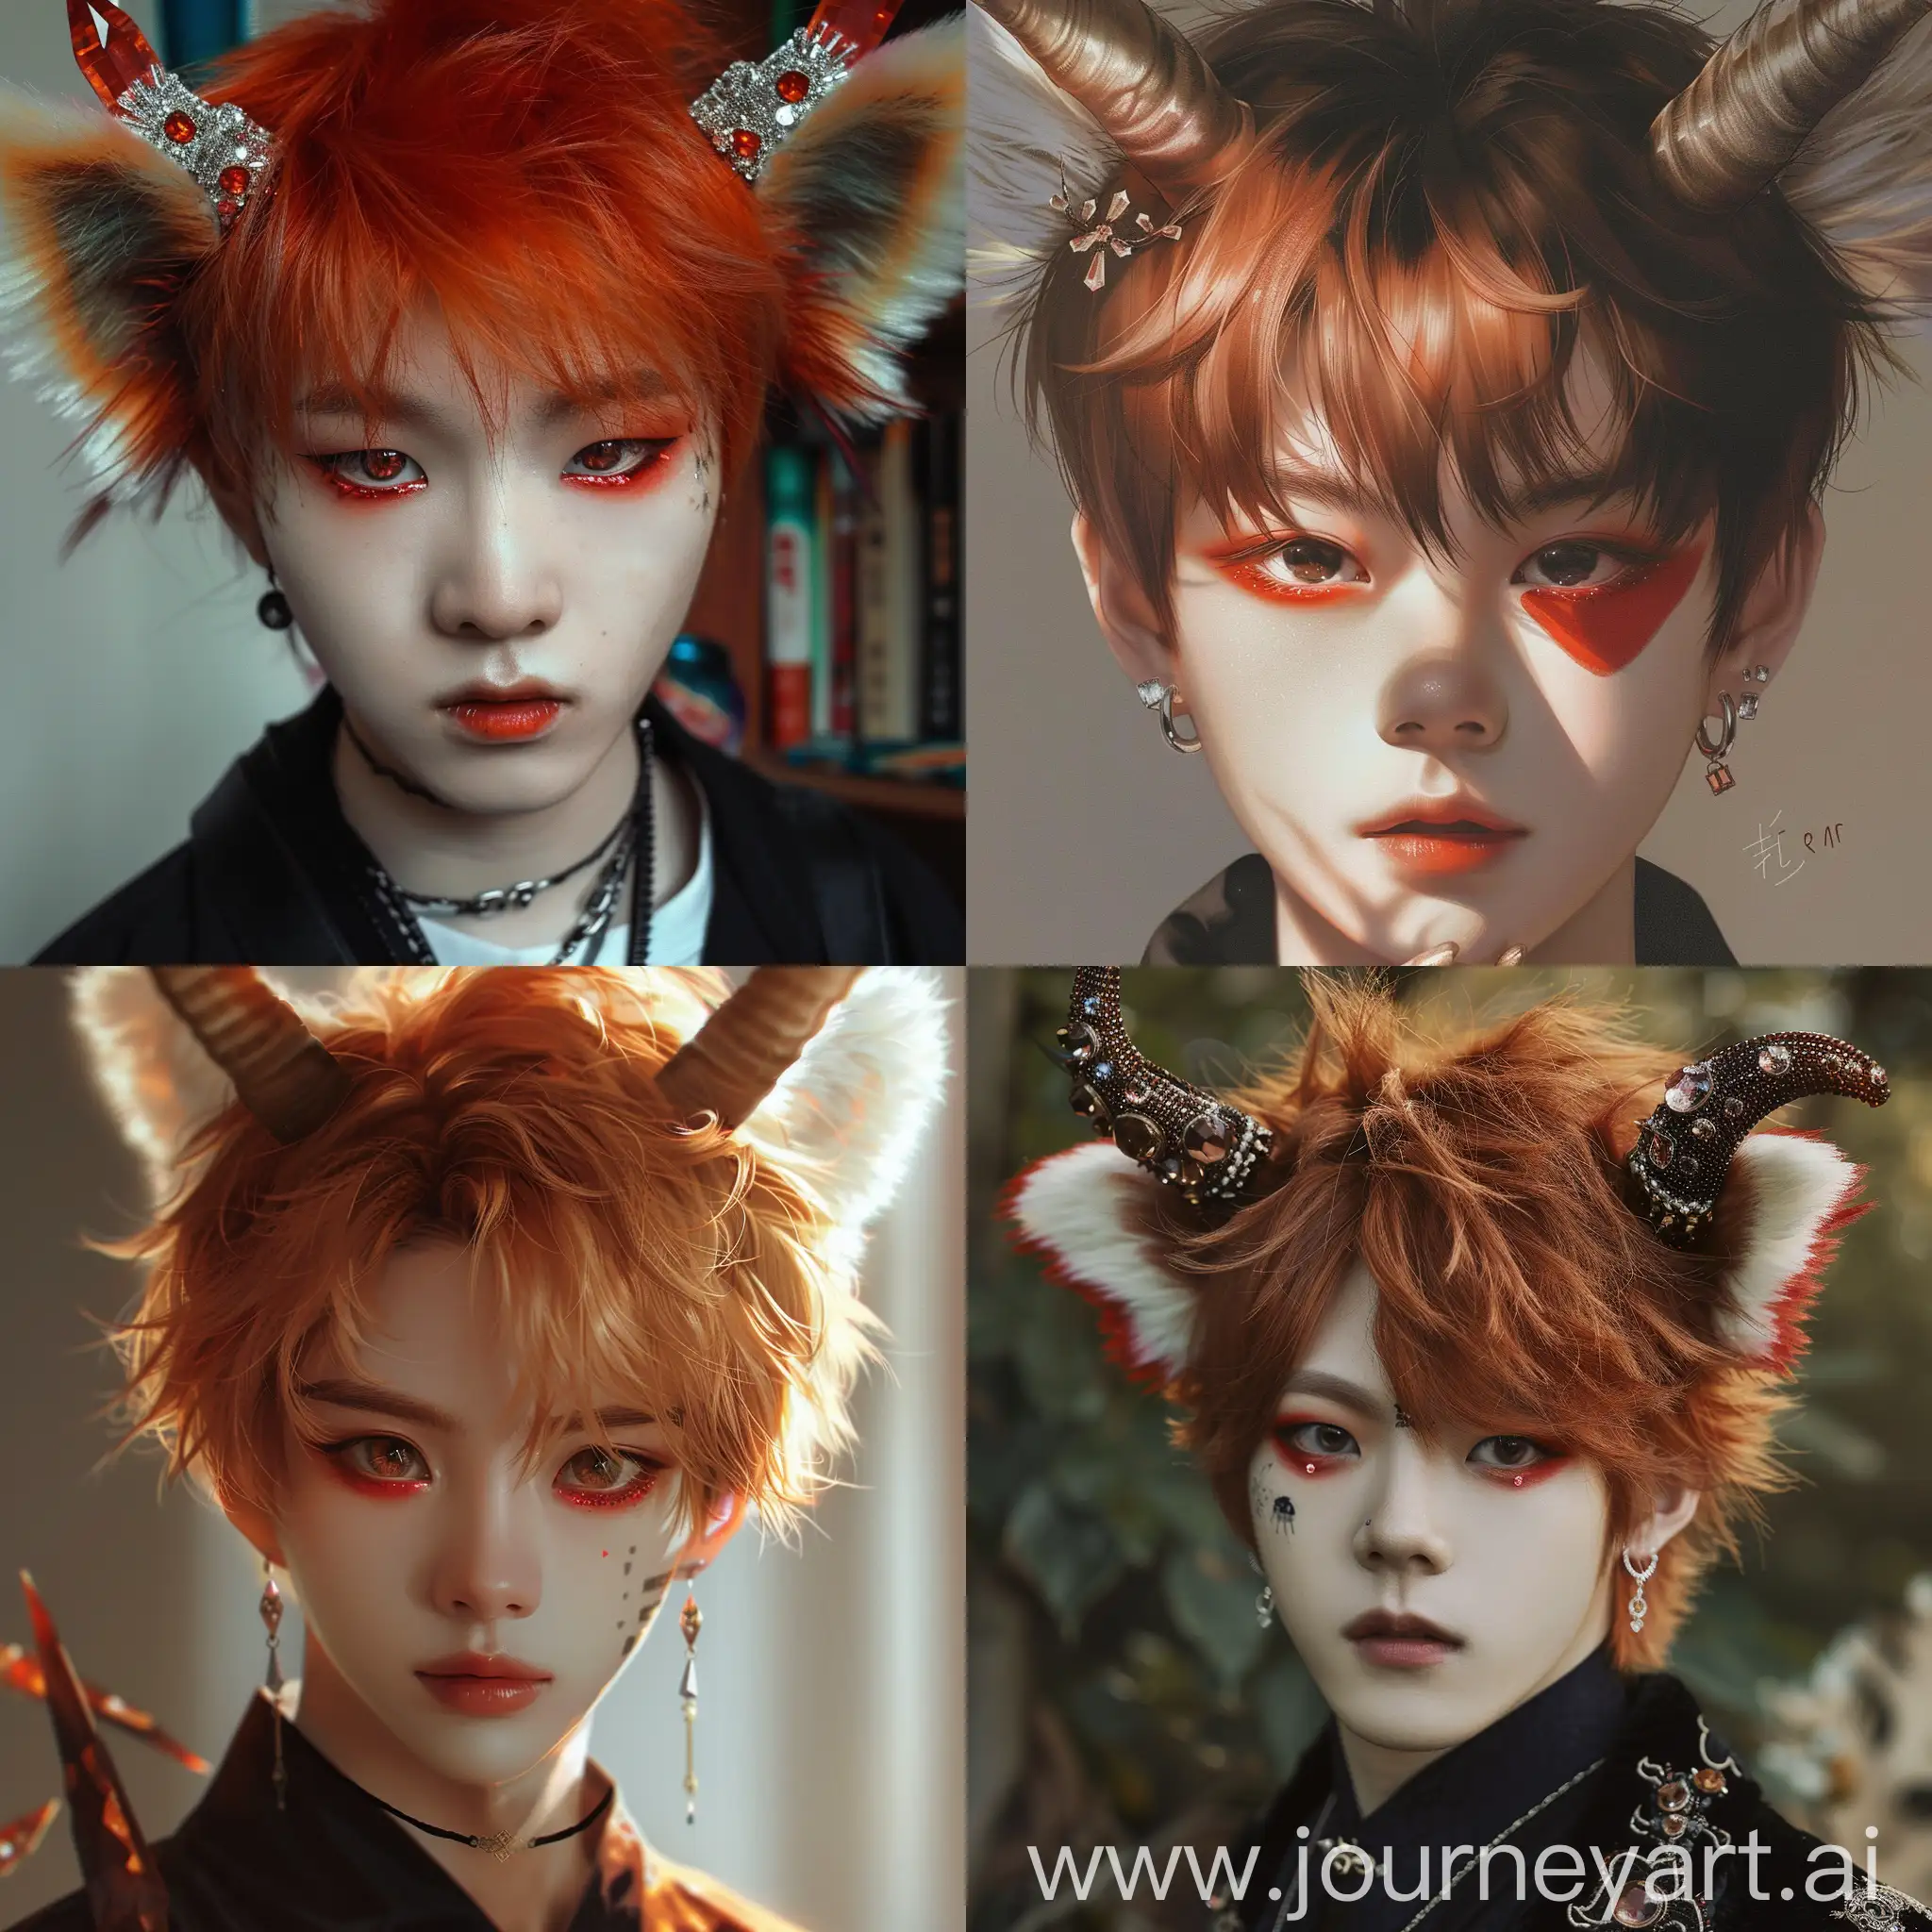 Stylish-Young-Adult-Male-with-Sunstone-Crystal-Horns-and-Red-Panda-Anime-Vibes